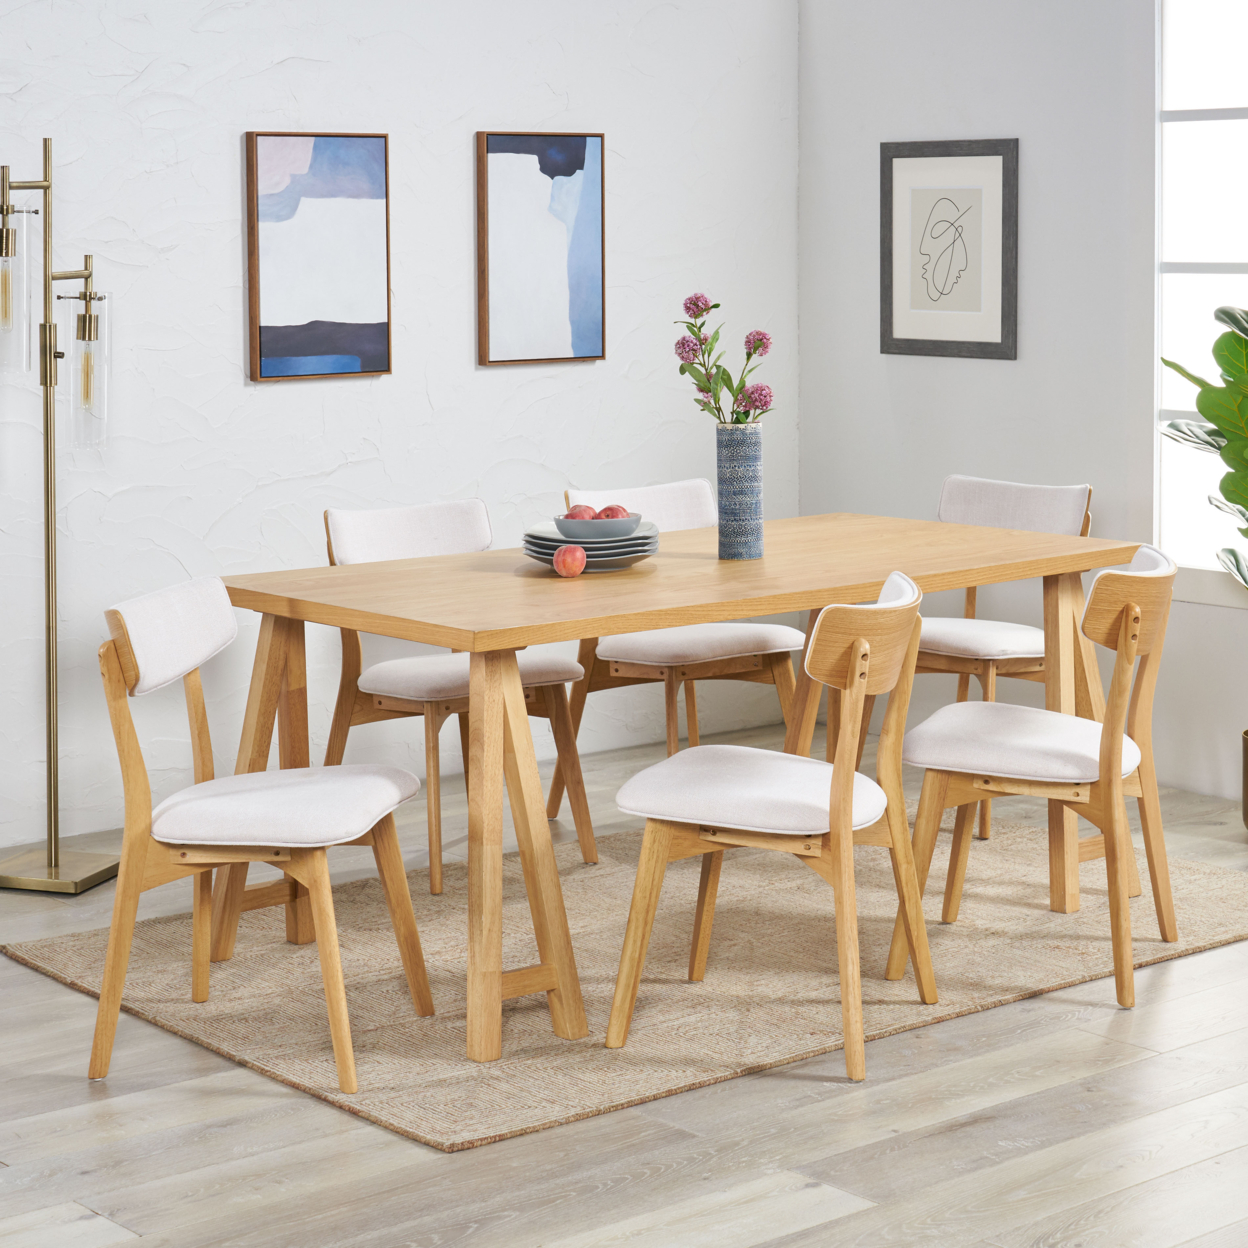 Turat Mid-Century Modern 7 Piece Dining Set With A-Frame Table - Natural Walnut/mint